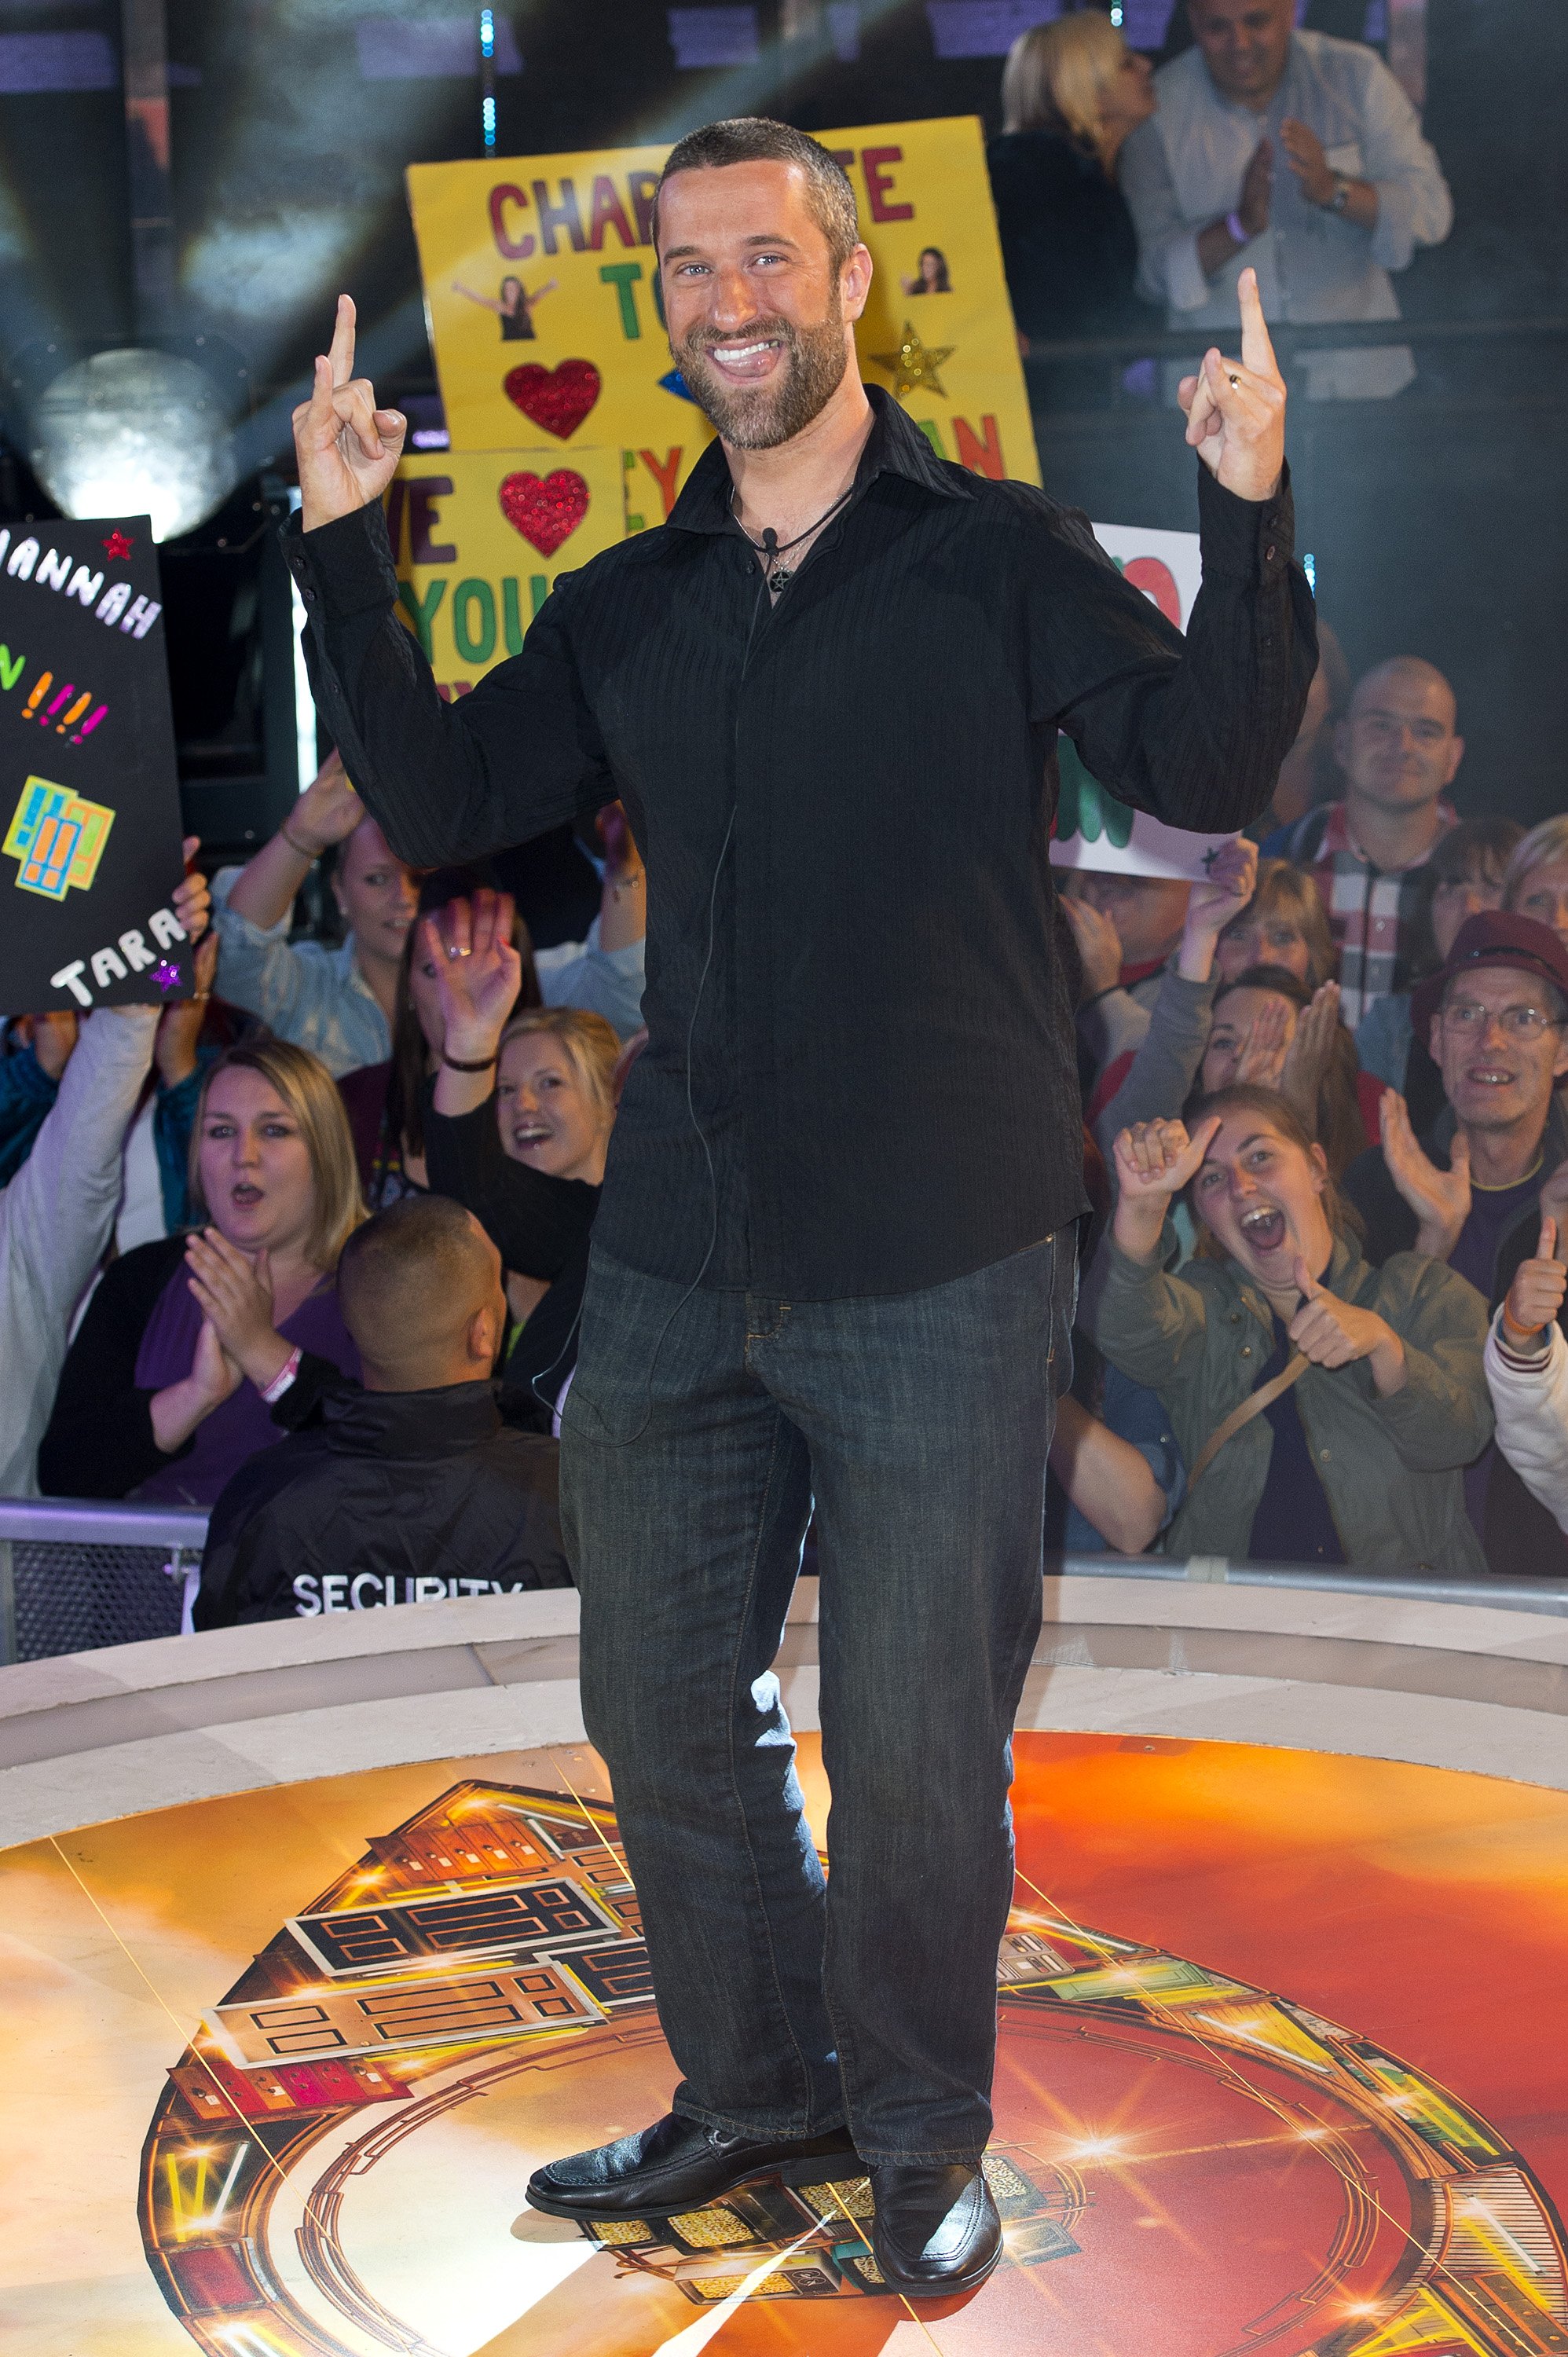 Dustin Diamond at his eviction ceremony from "The Celebrity Big Brother" house, England, September 2013 | Photo: Getty Images.